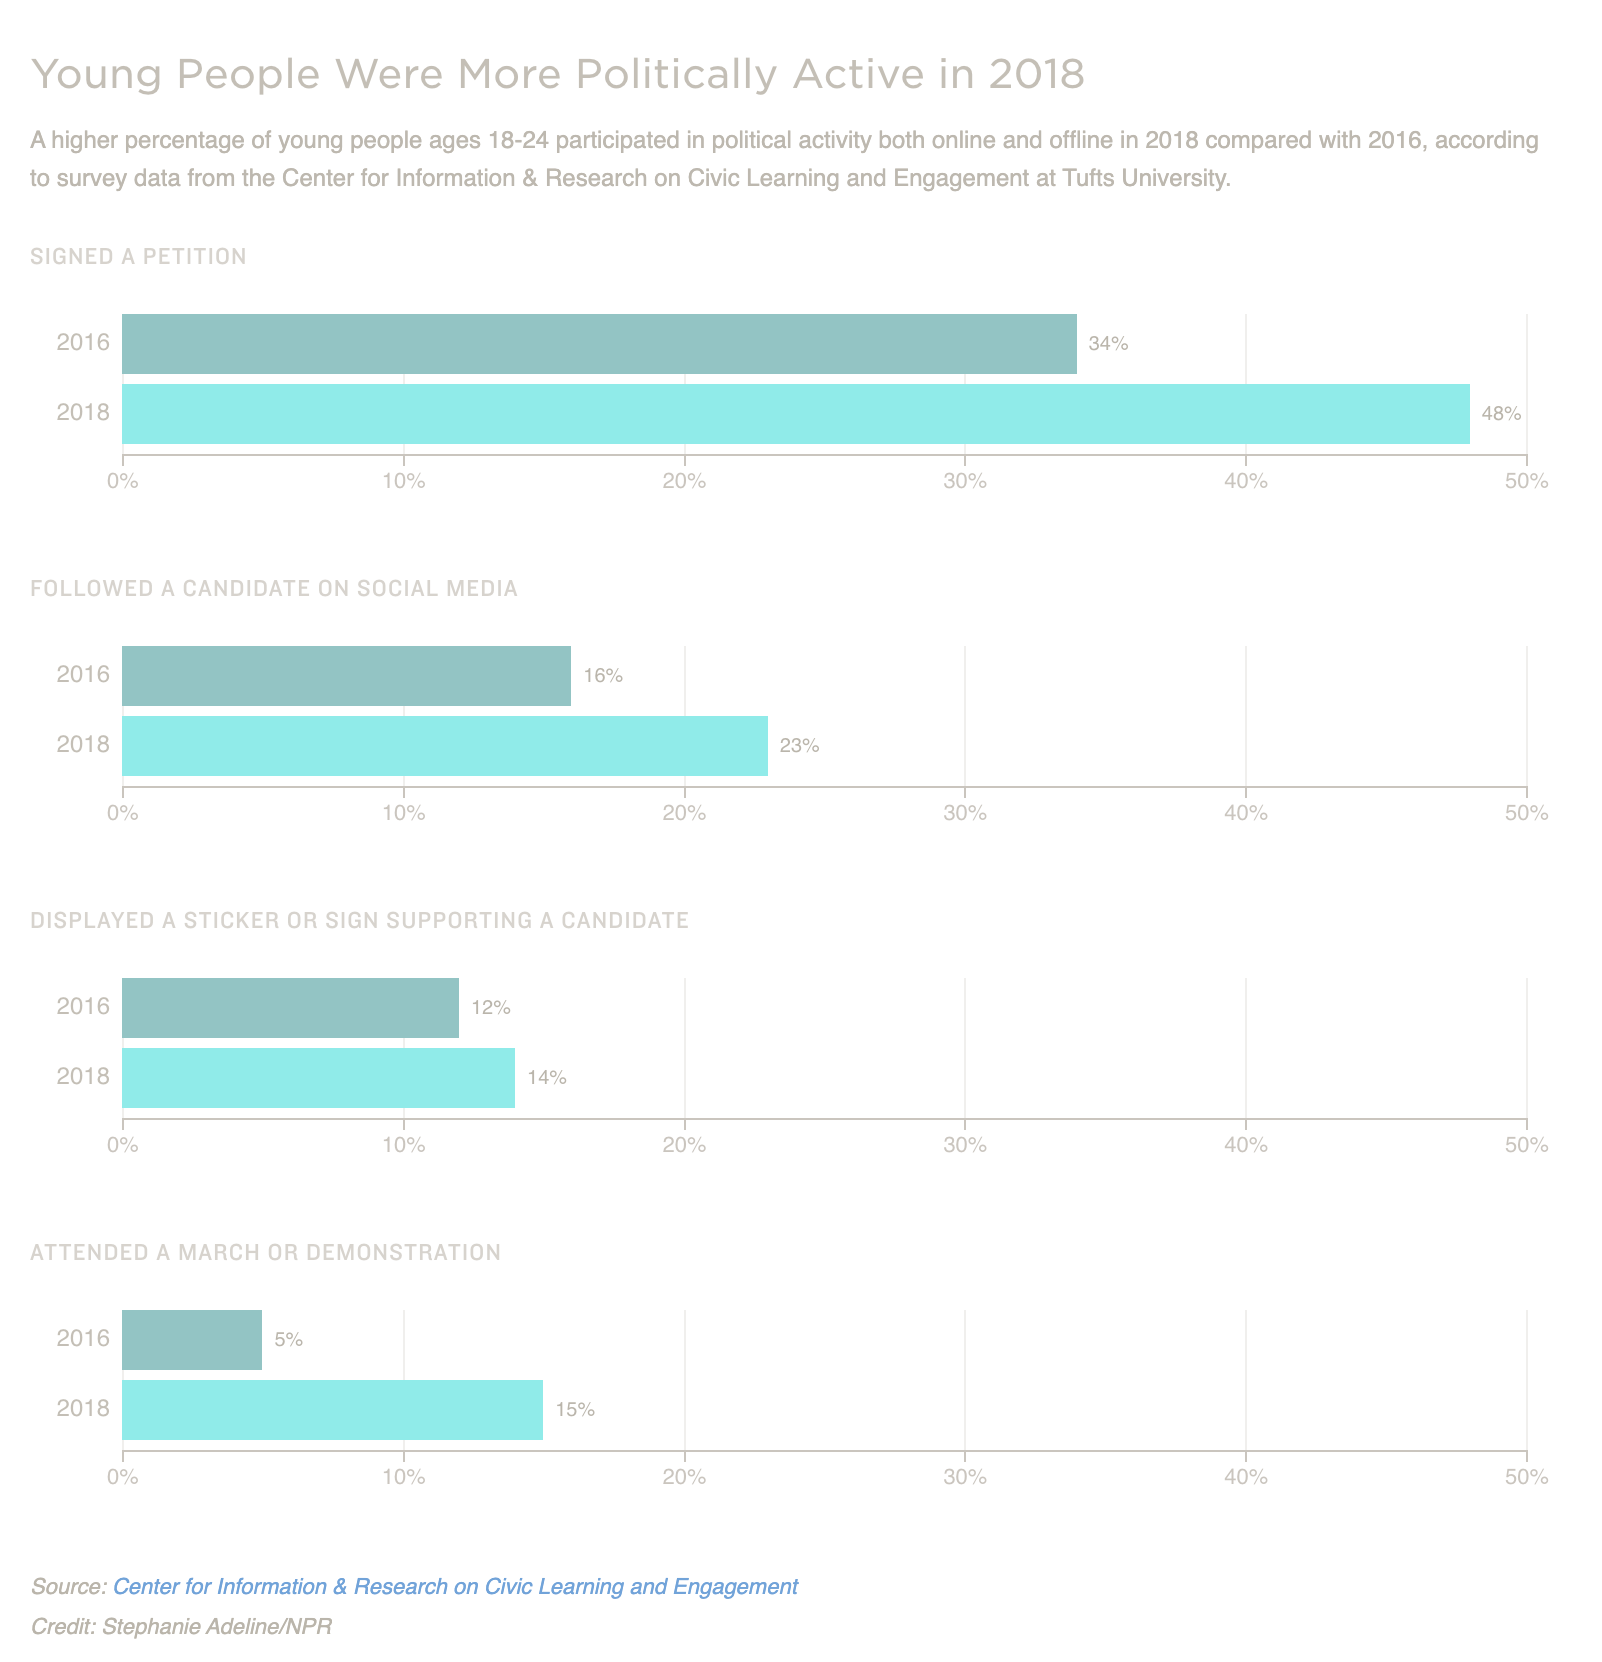 Young People Were More Politically Active in 2018